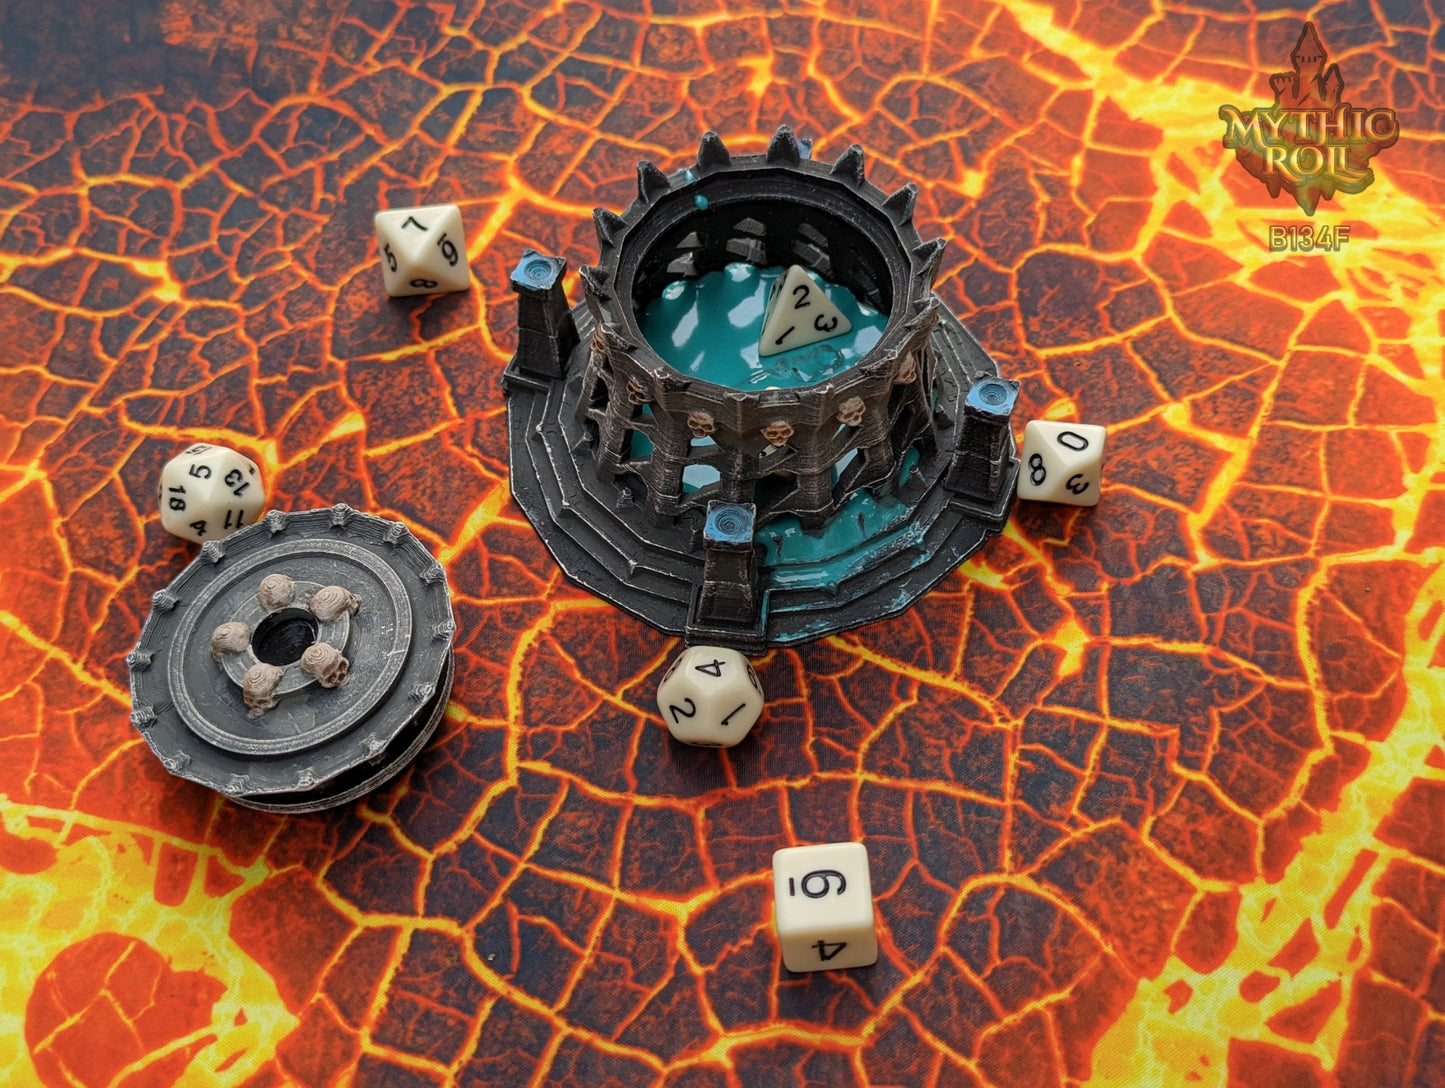 Necromancer's Mausoleum 3D Printed Dice Jail | RPG Dice Vault | D20 Storage Box | Dice Bag - Mythic Roll Collection by Unchained Games.